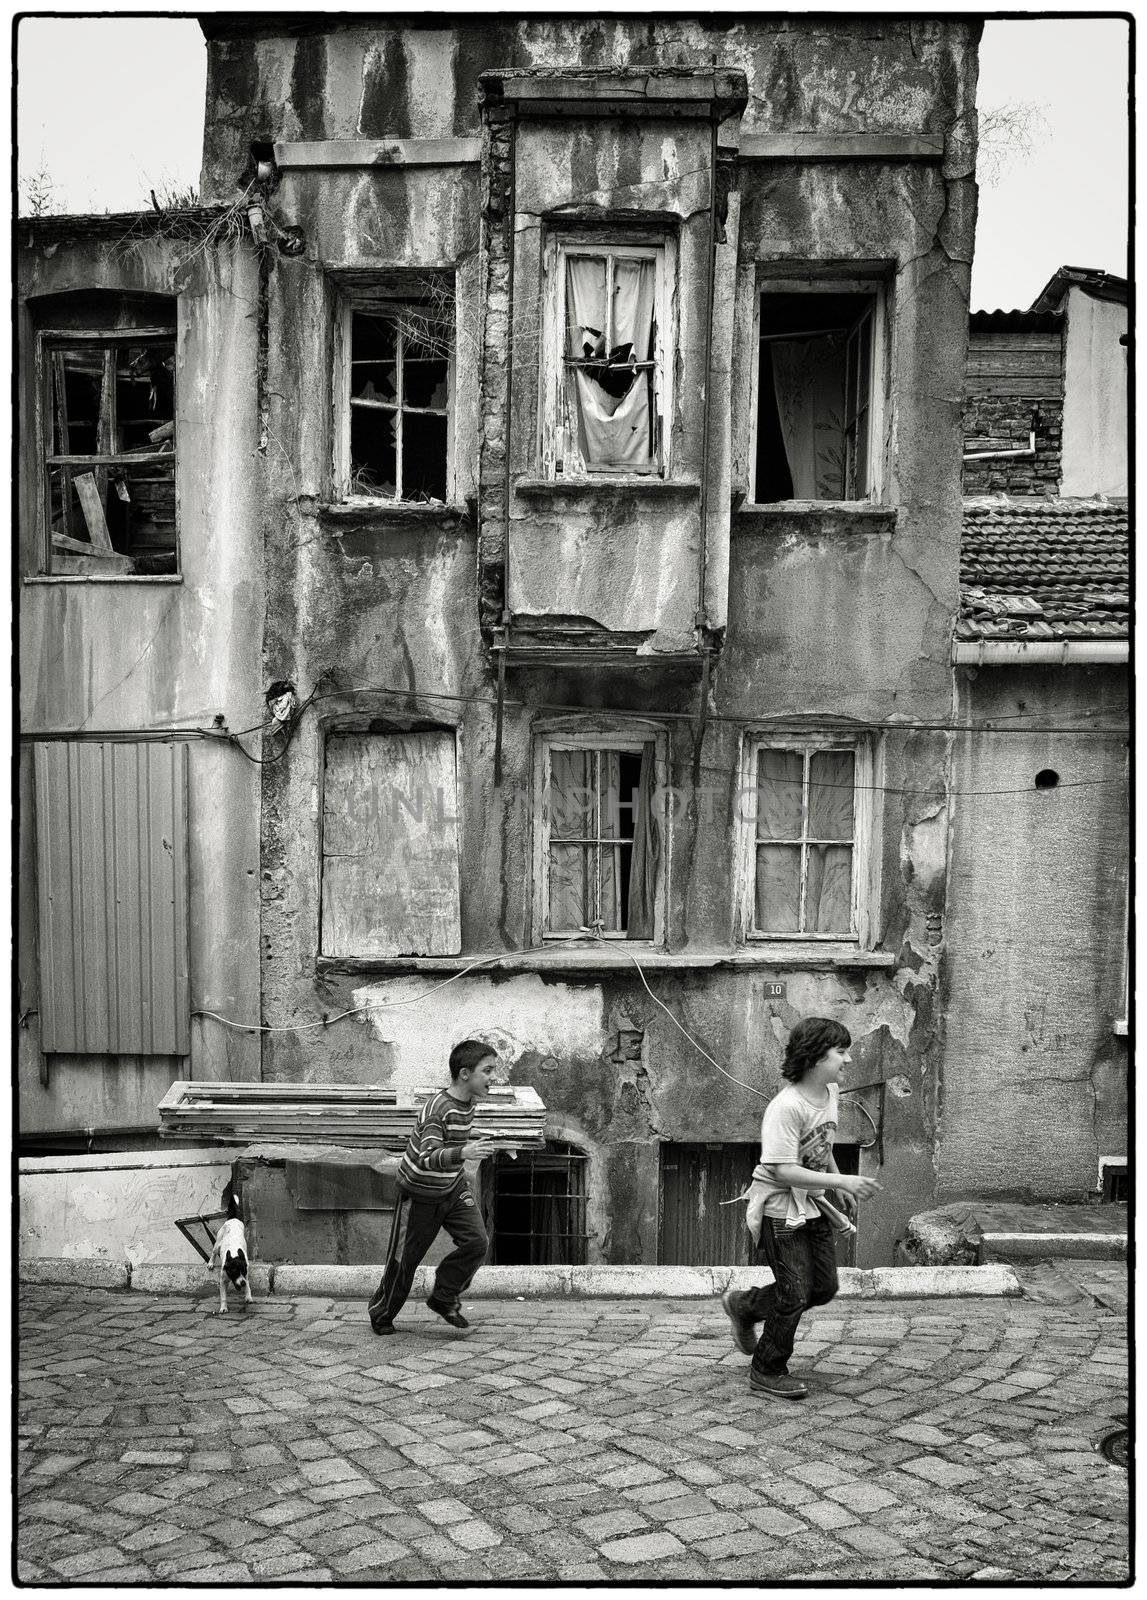 ACTIVE TYRKISH BOYS, ISTANBUL, TURKEY, APRIL 17, 2012: Kids playing around with their dog in the streets of Fatih, Istanbul, Turkey.